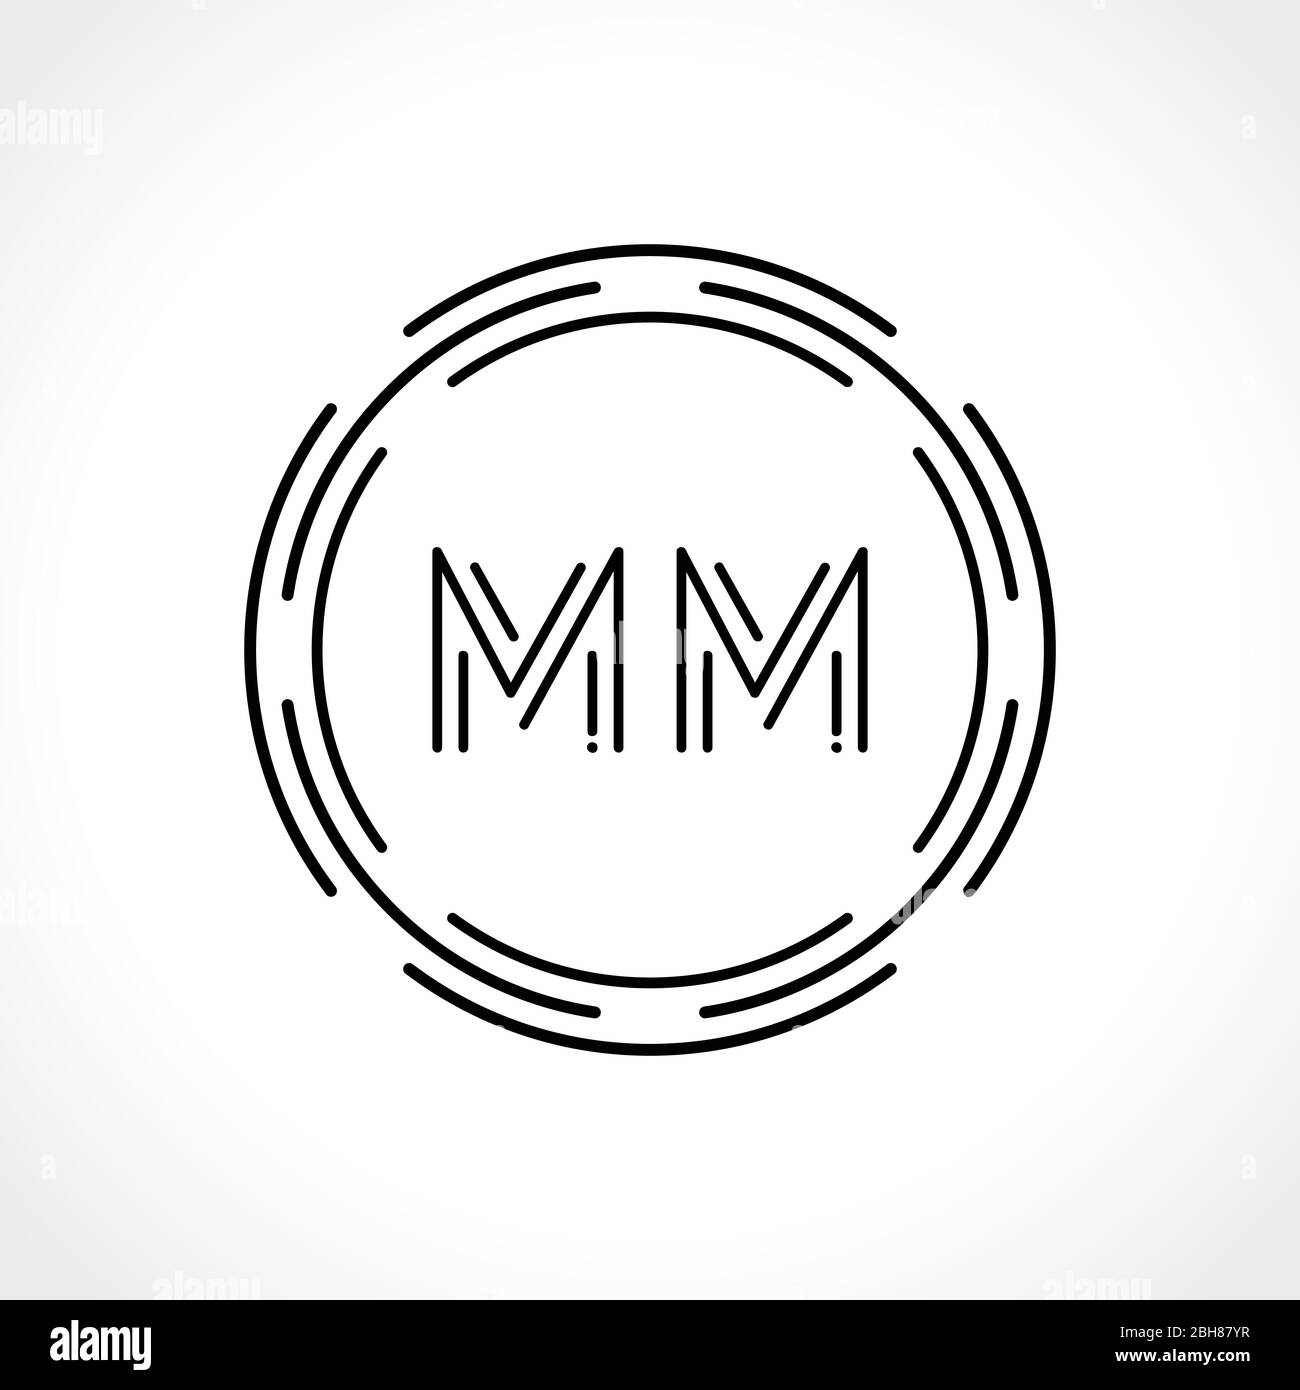 Initial Mm Letter Vector & Photo (Free Trial)